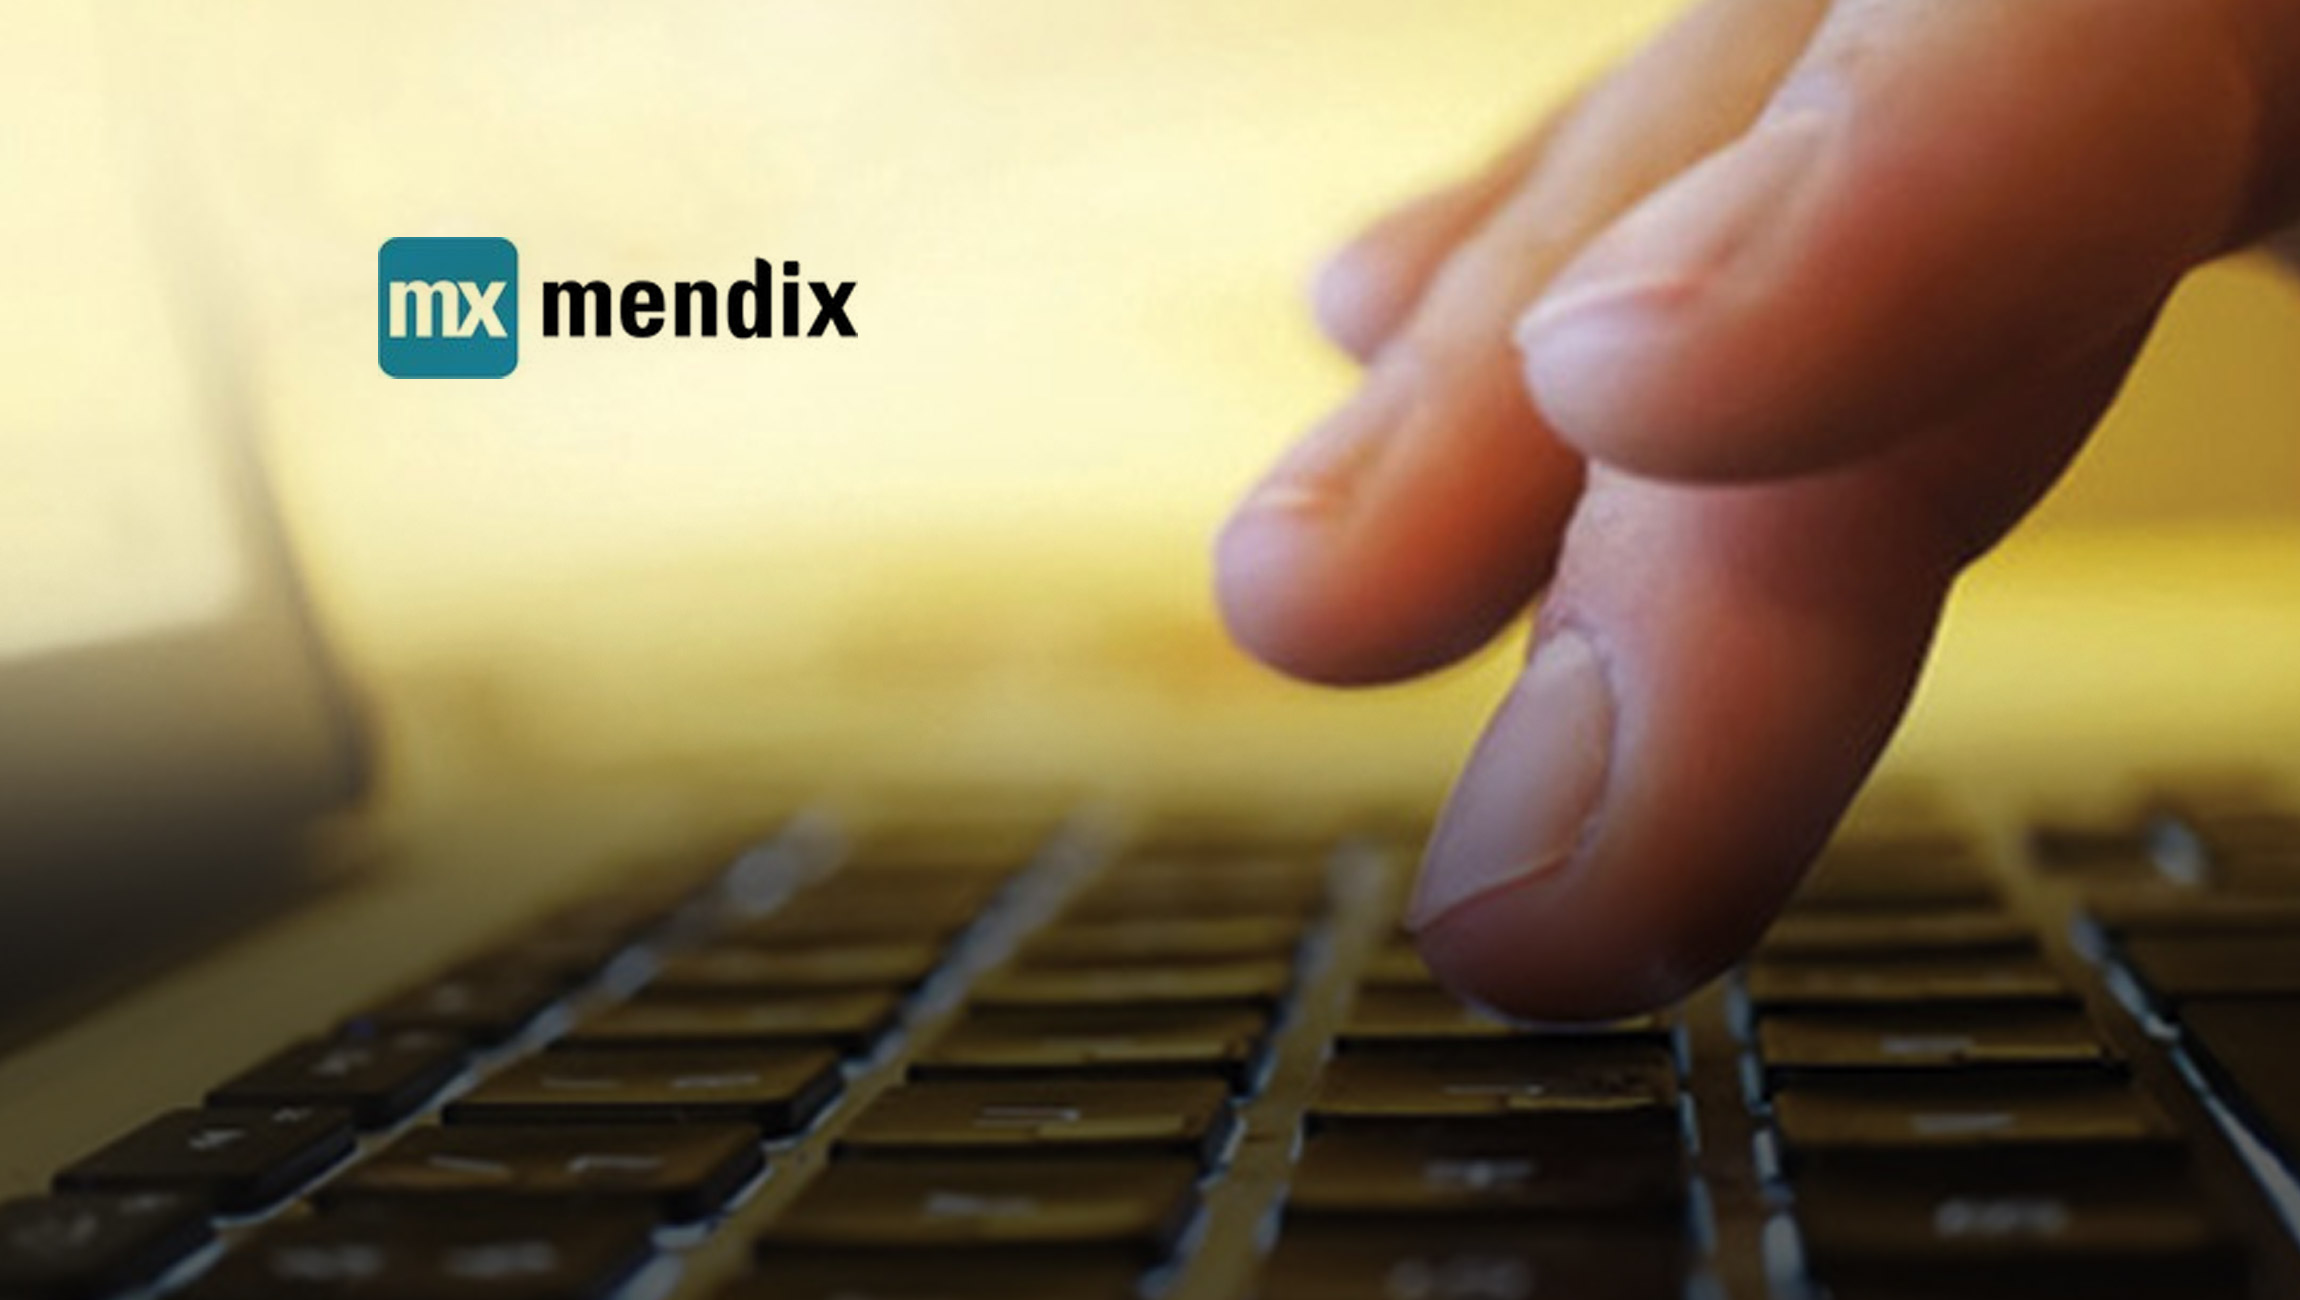 2022 Magic Quadrant for Enterprise Low-Code Application Platforms by Gartner Recognizes Mendix as a Leader for Fourth Consecutive Time